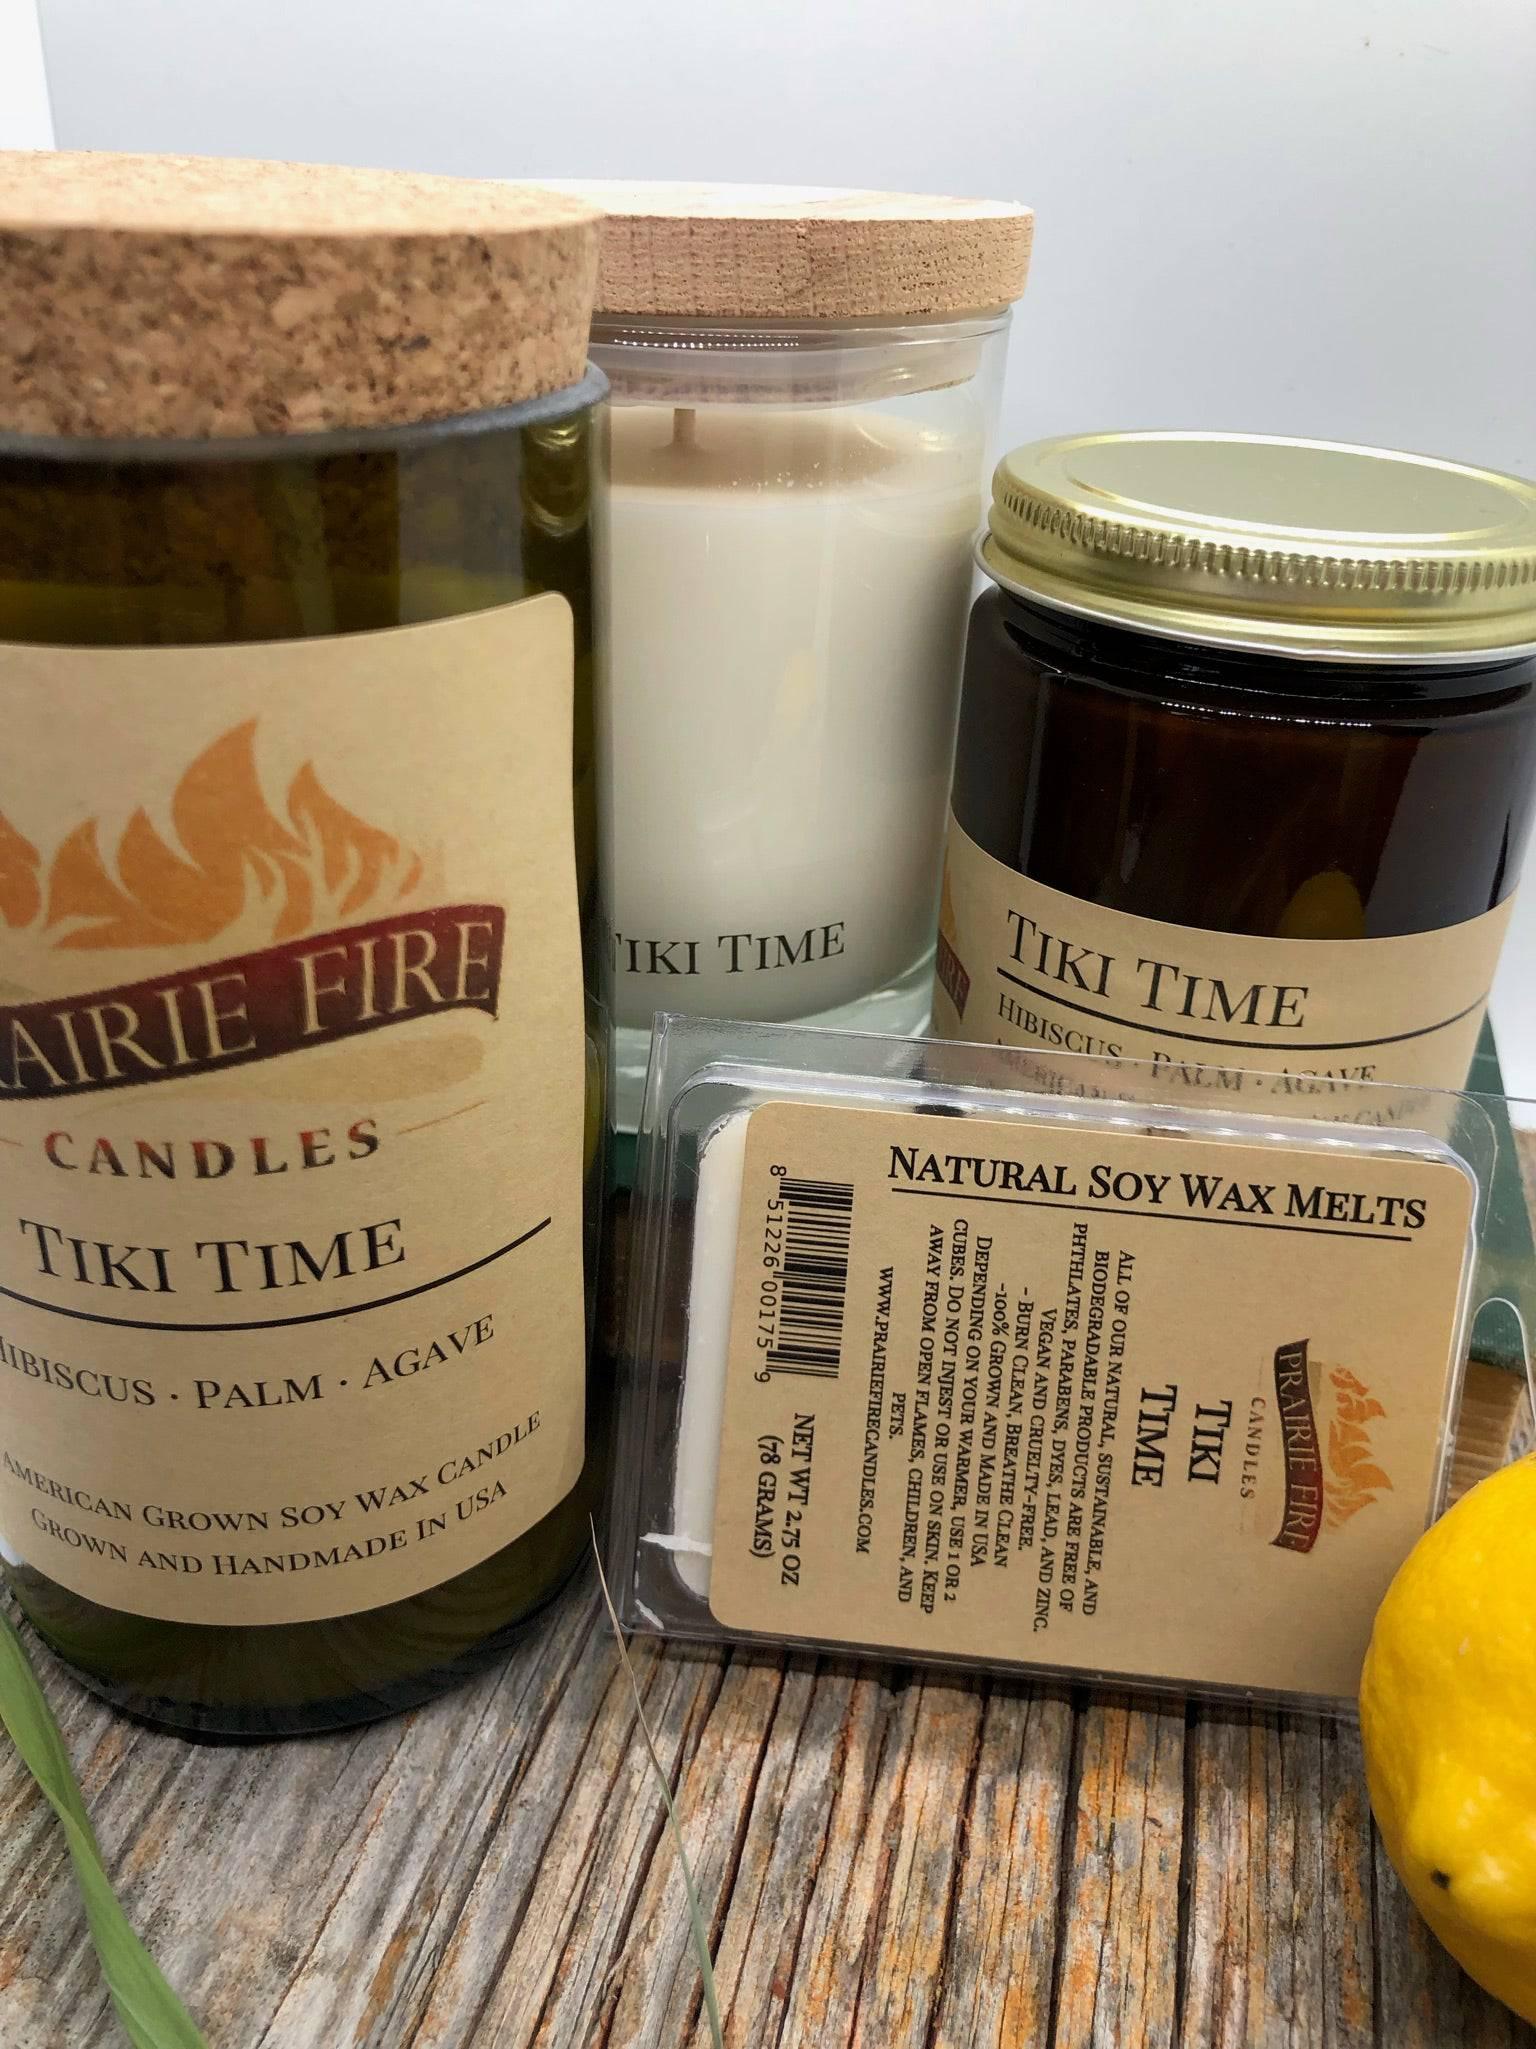 Tiki Time Soy Wax Candle | Repurposed Wine Bottle Candle Natural Cork | Handmade in USA Candle | Eco-Friendly Candle | Non-Toxic Soy Candle - Prairie Fire Candles